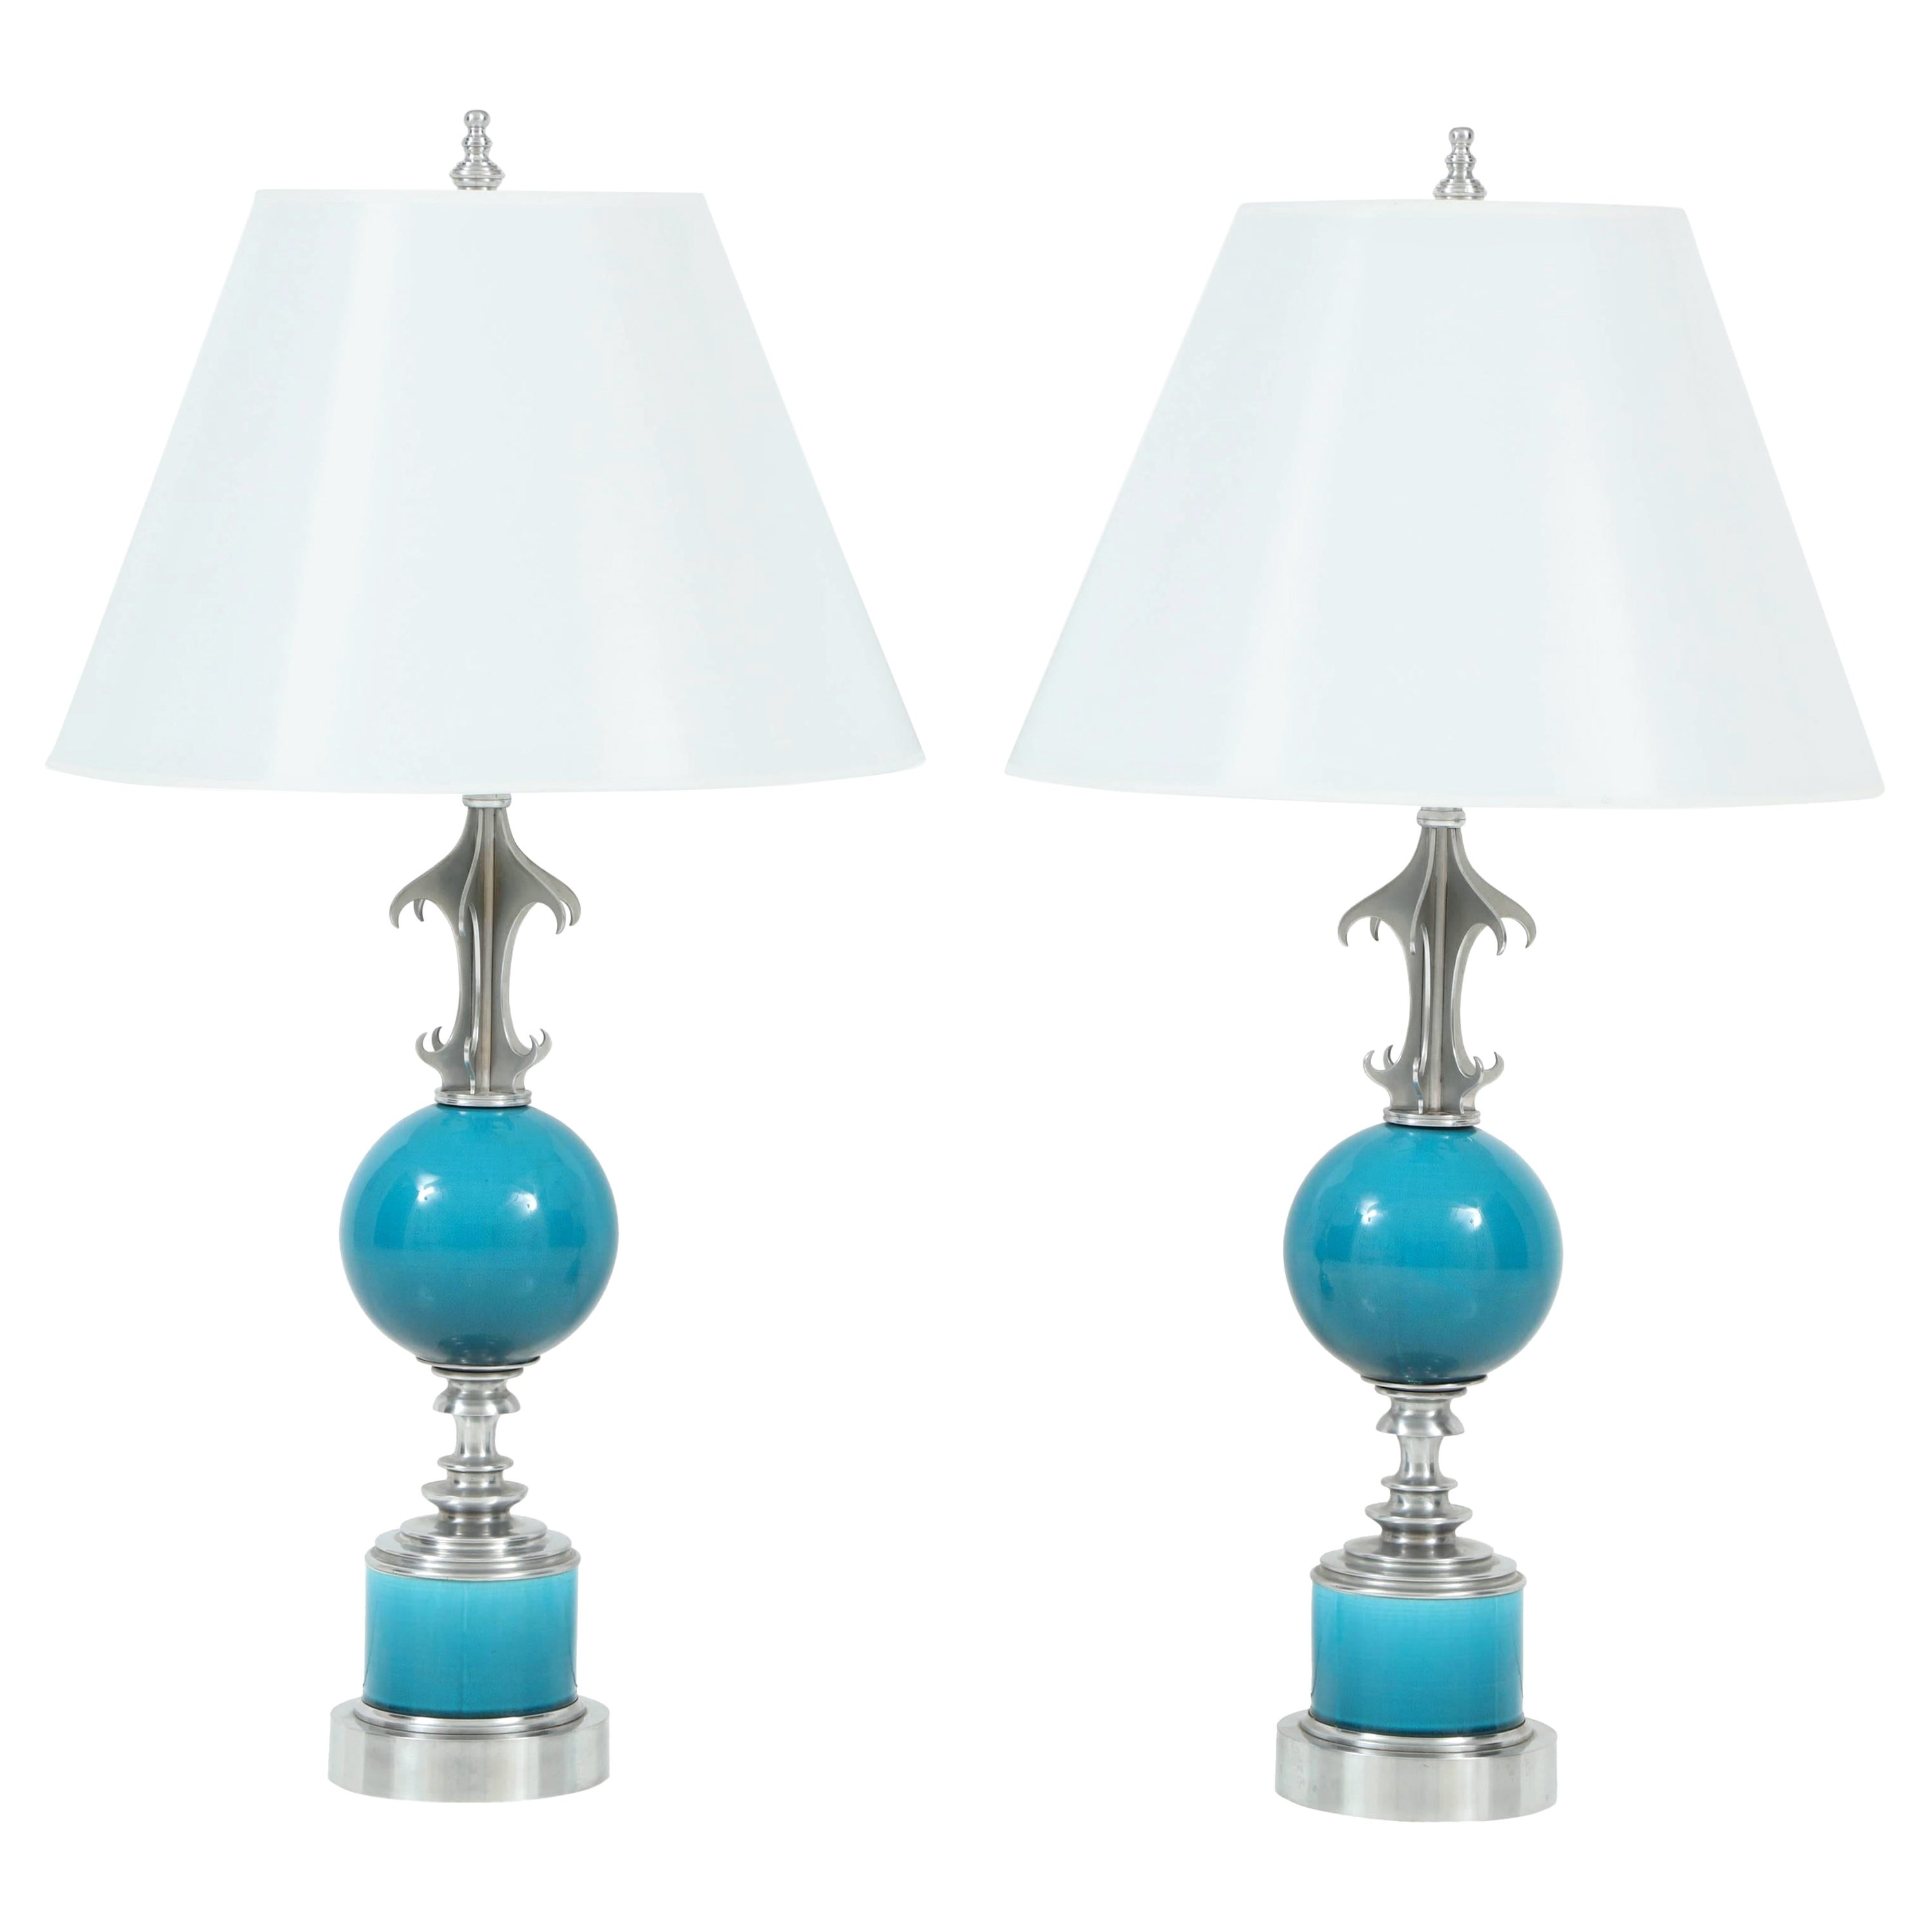 Pair of Blue Ceramic and Nickel-Plated Metal Table Lamps For Sale